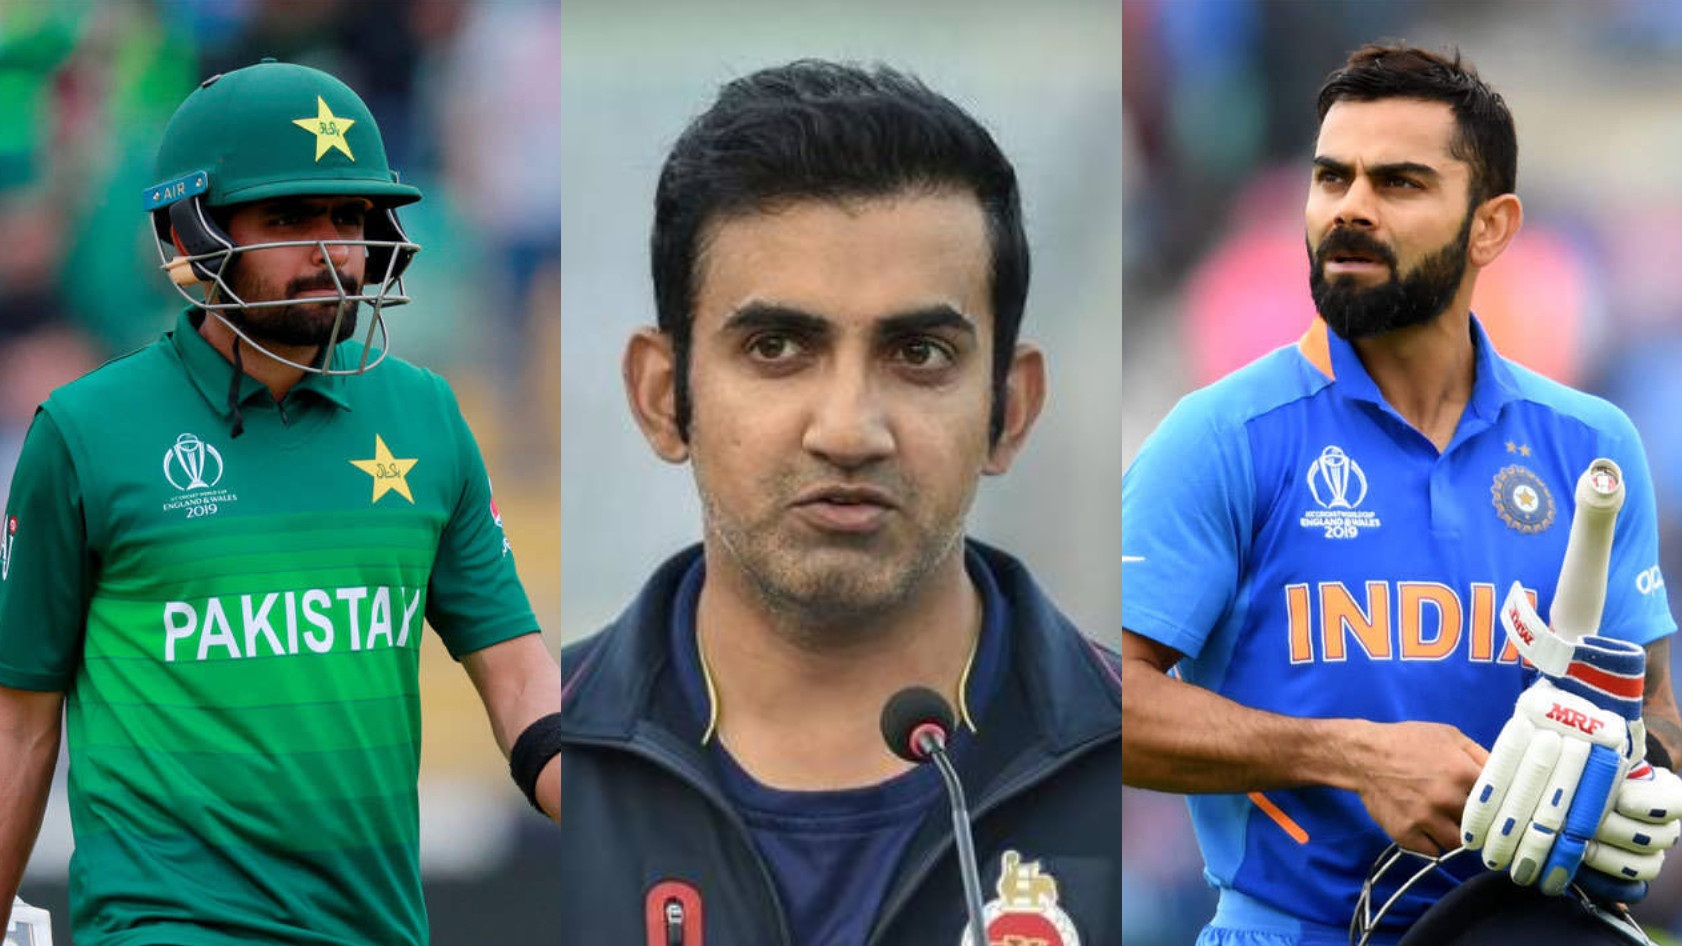 T20 World Cup 2021: Crucial India plays Pakistan early in tournament and then focus on rest of games- Gambhir